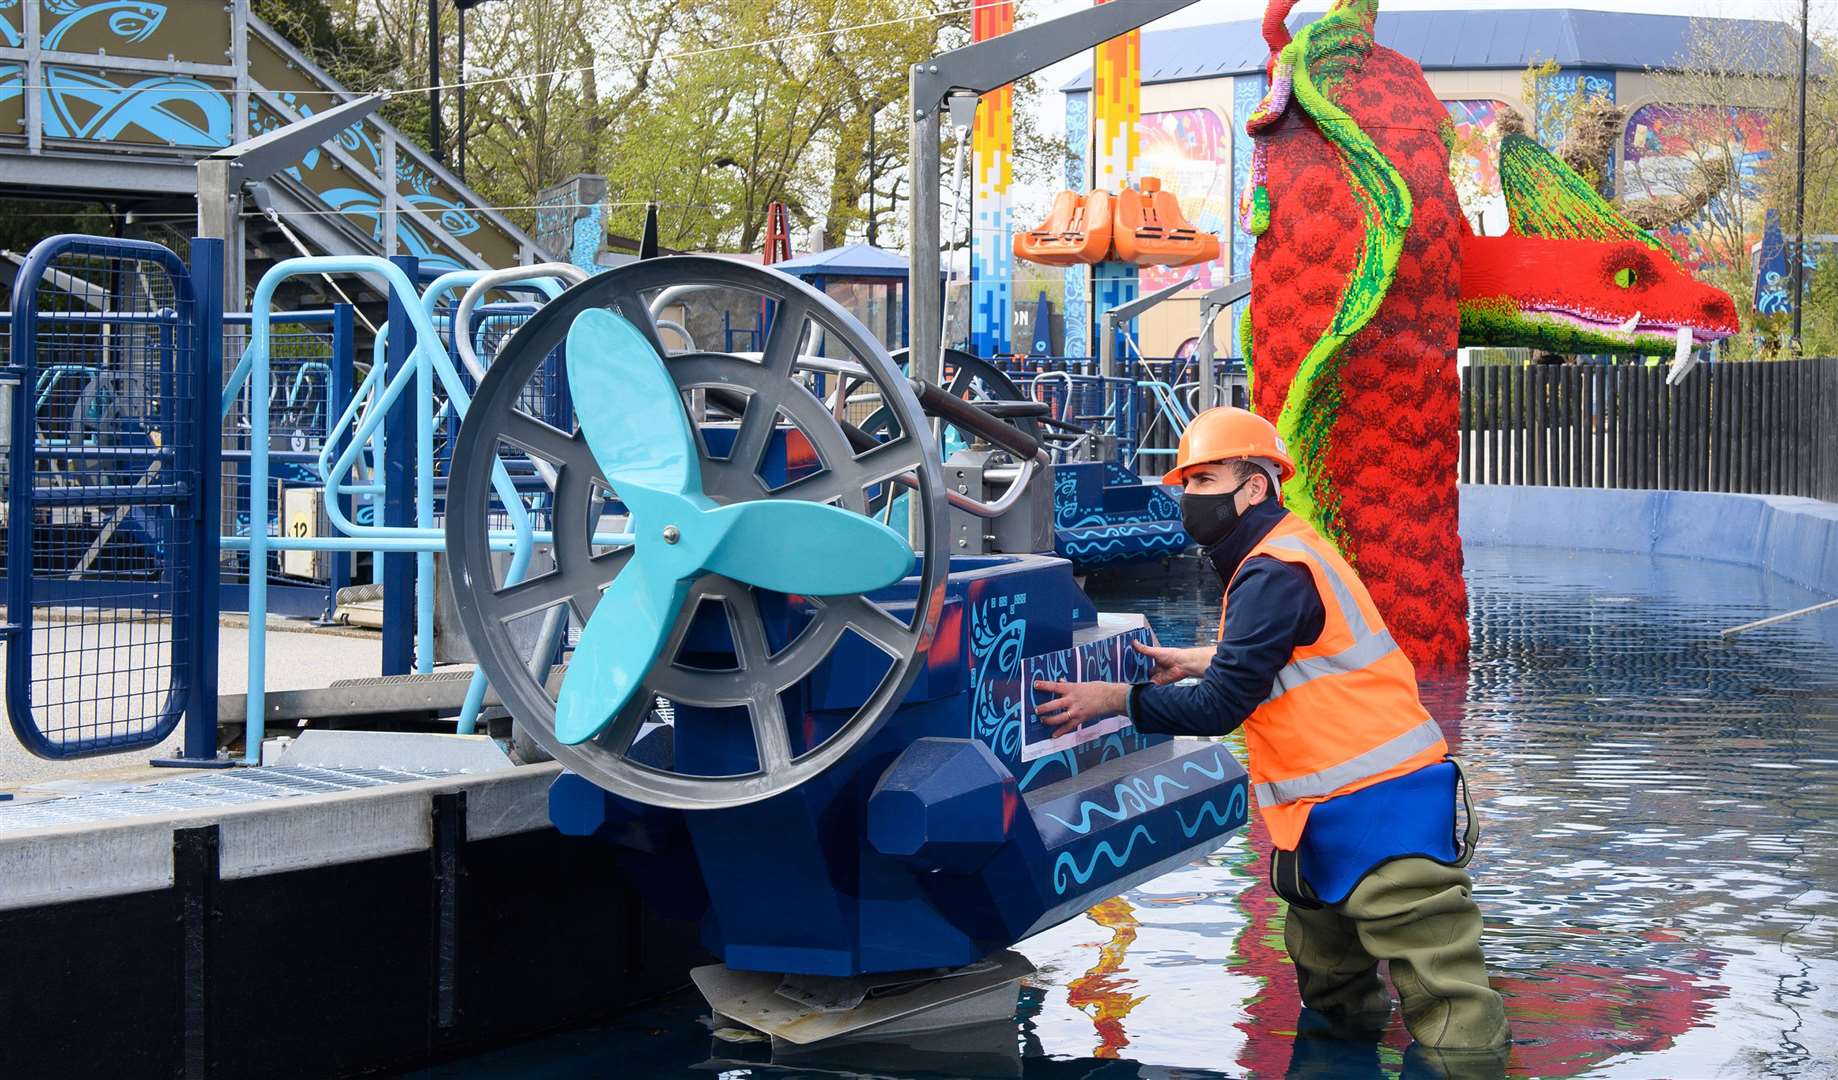 Water ride Hydra’s Challenge will soak visitors this summer